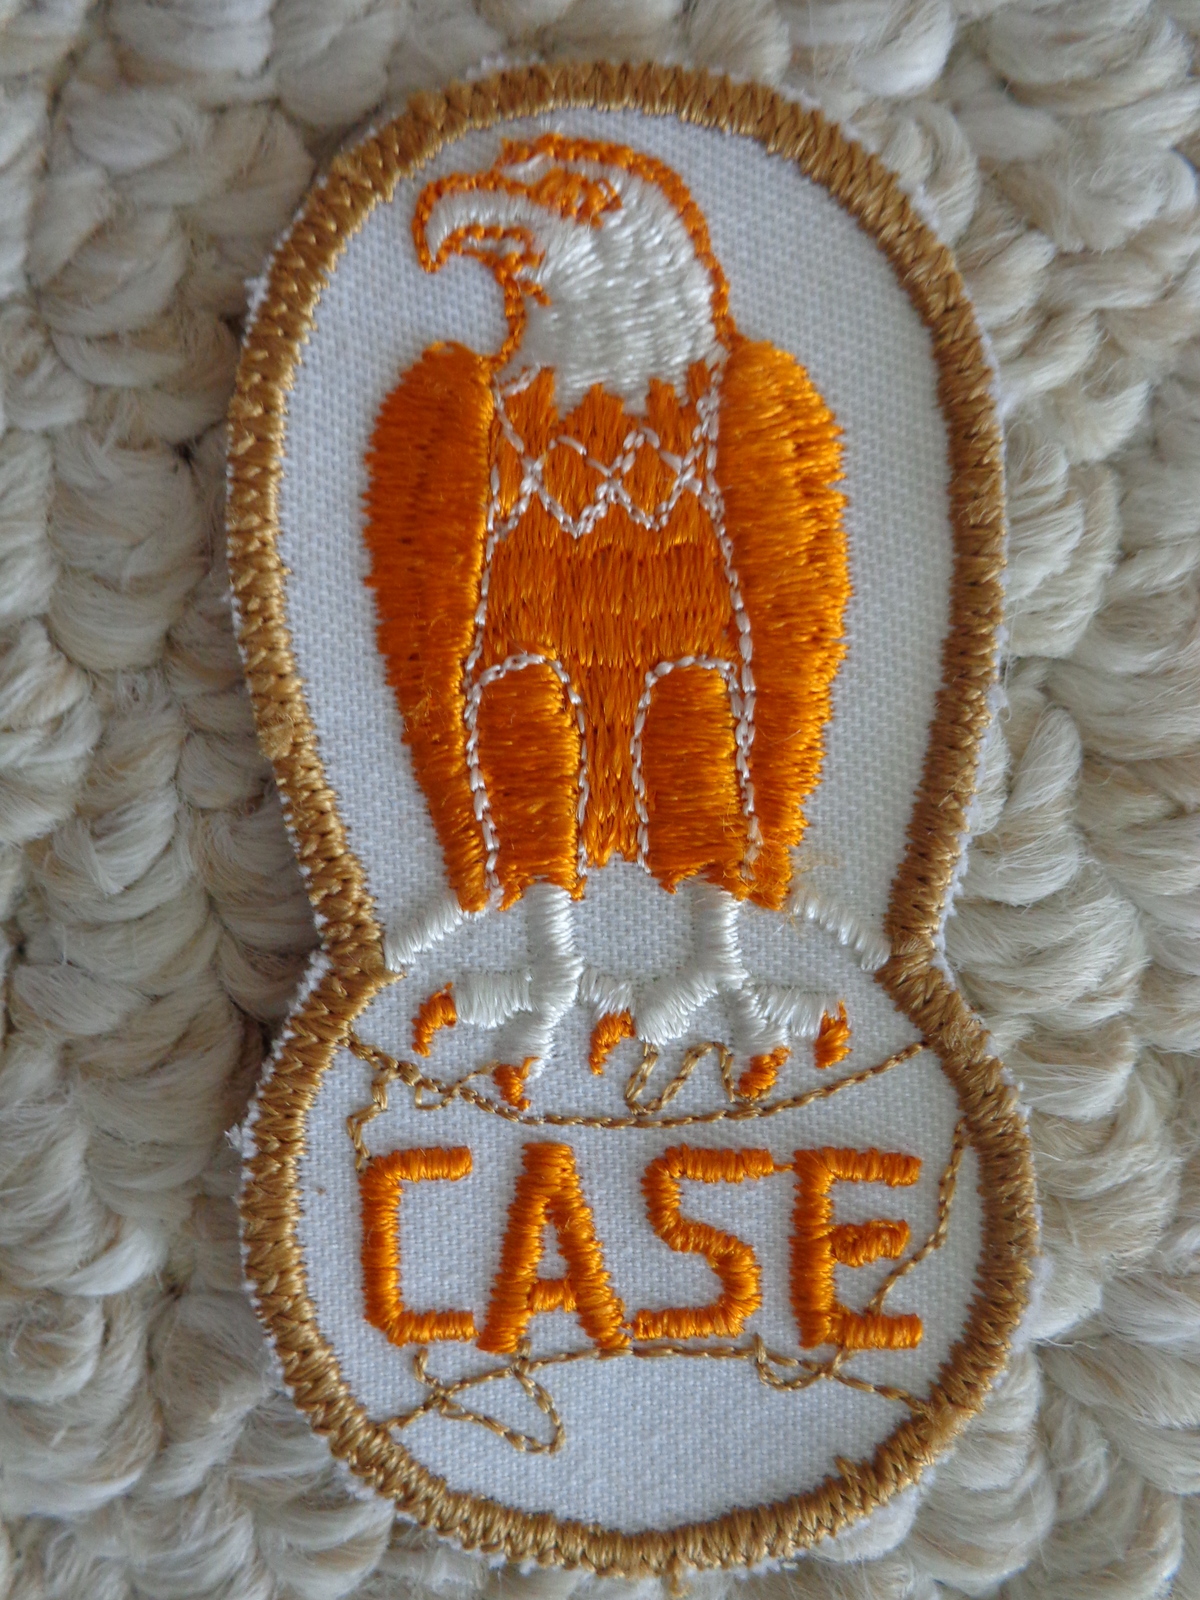 “CASE” with GOLDEN EAGLE CLOTH PATCH (#1883) - $15.99